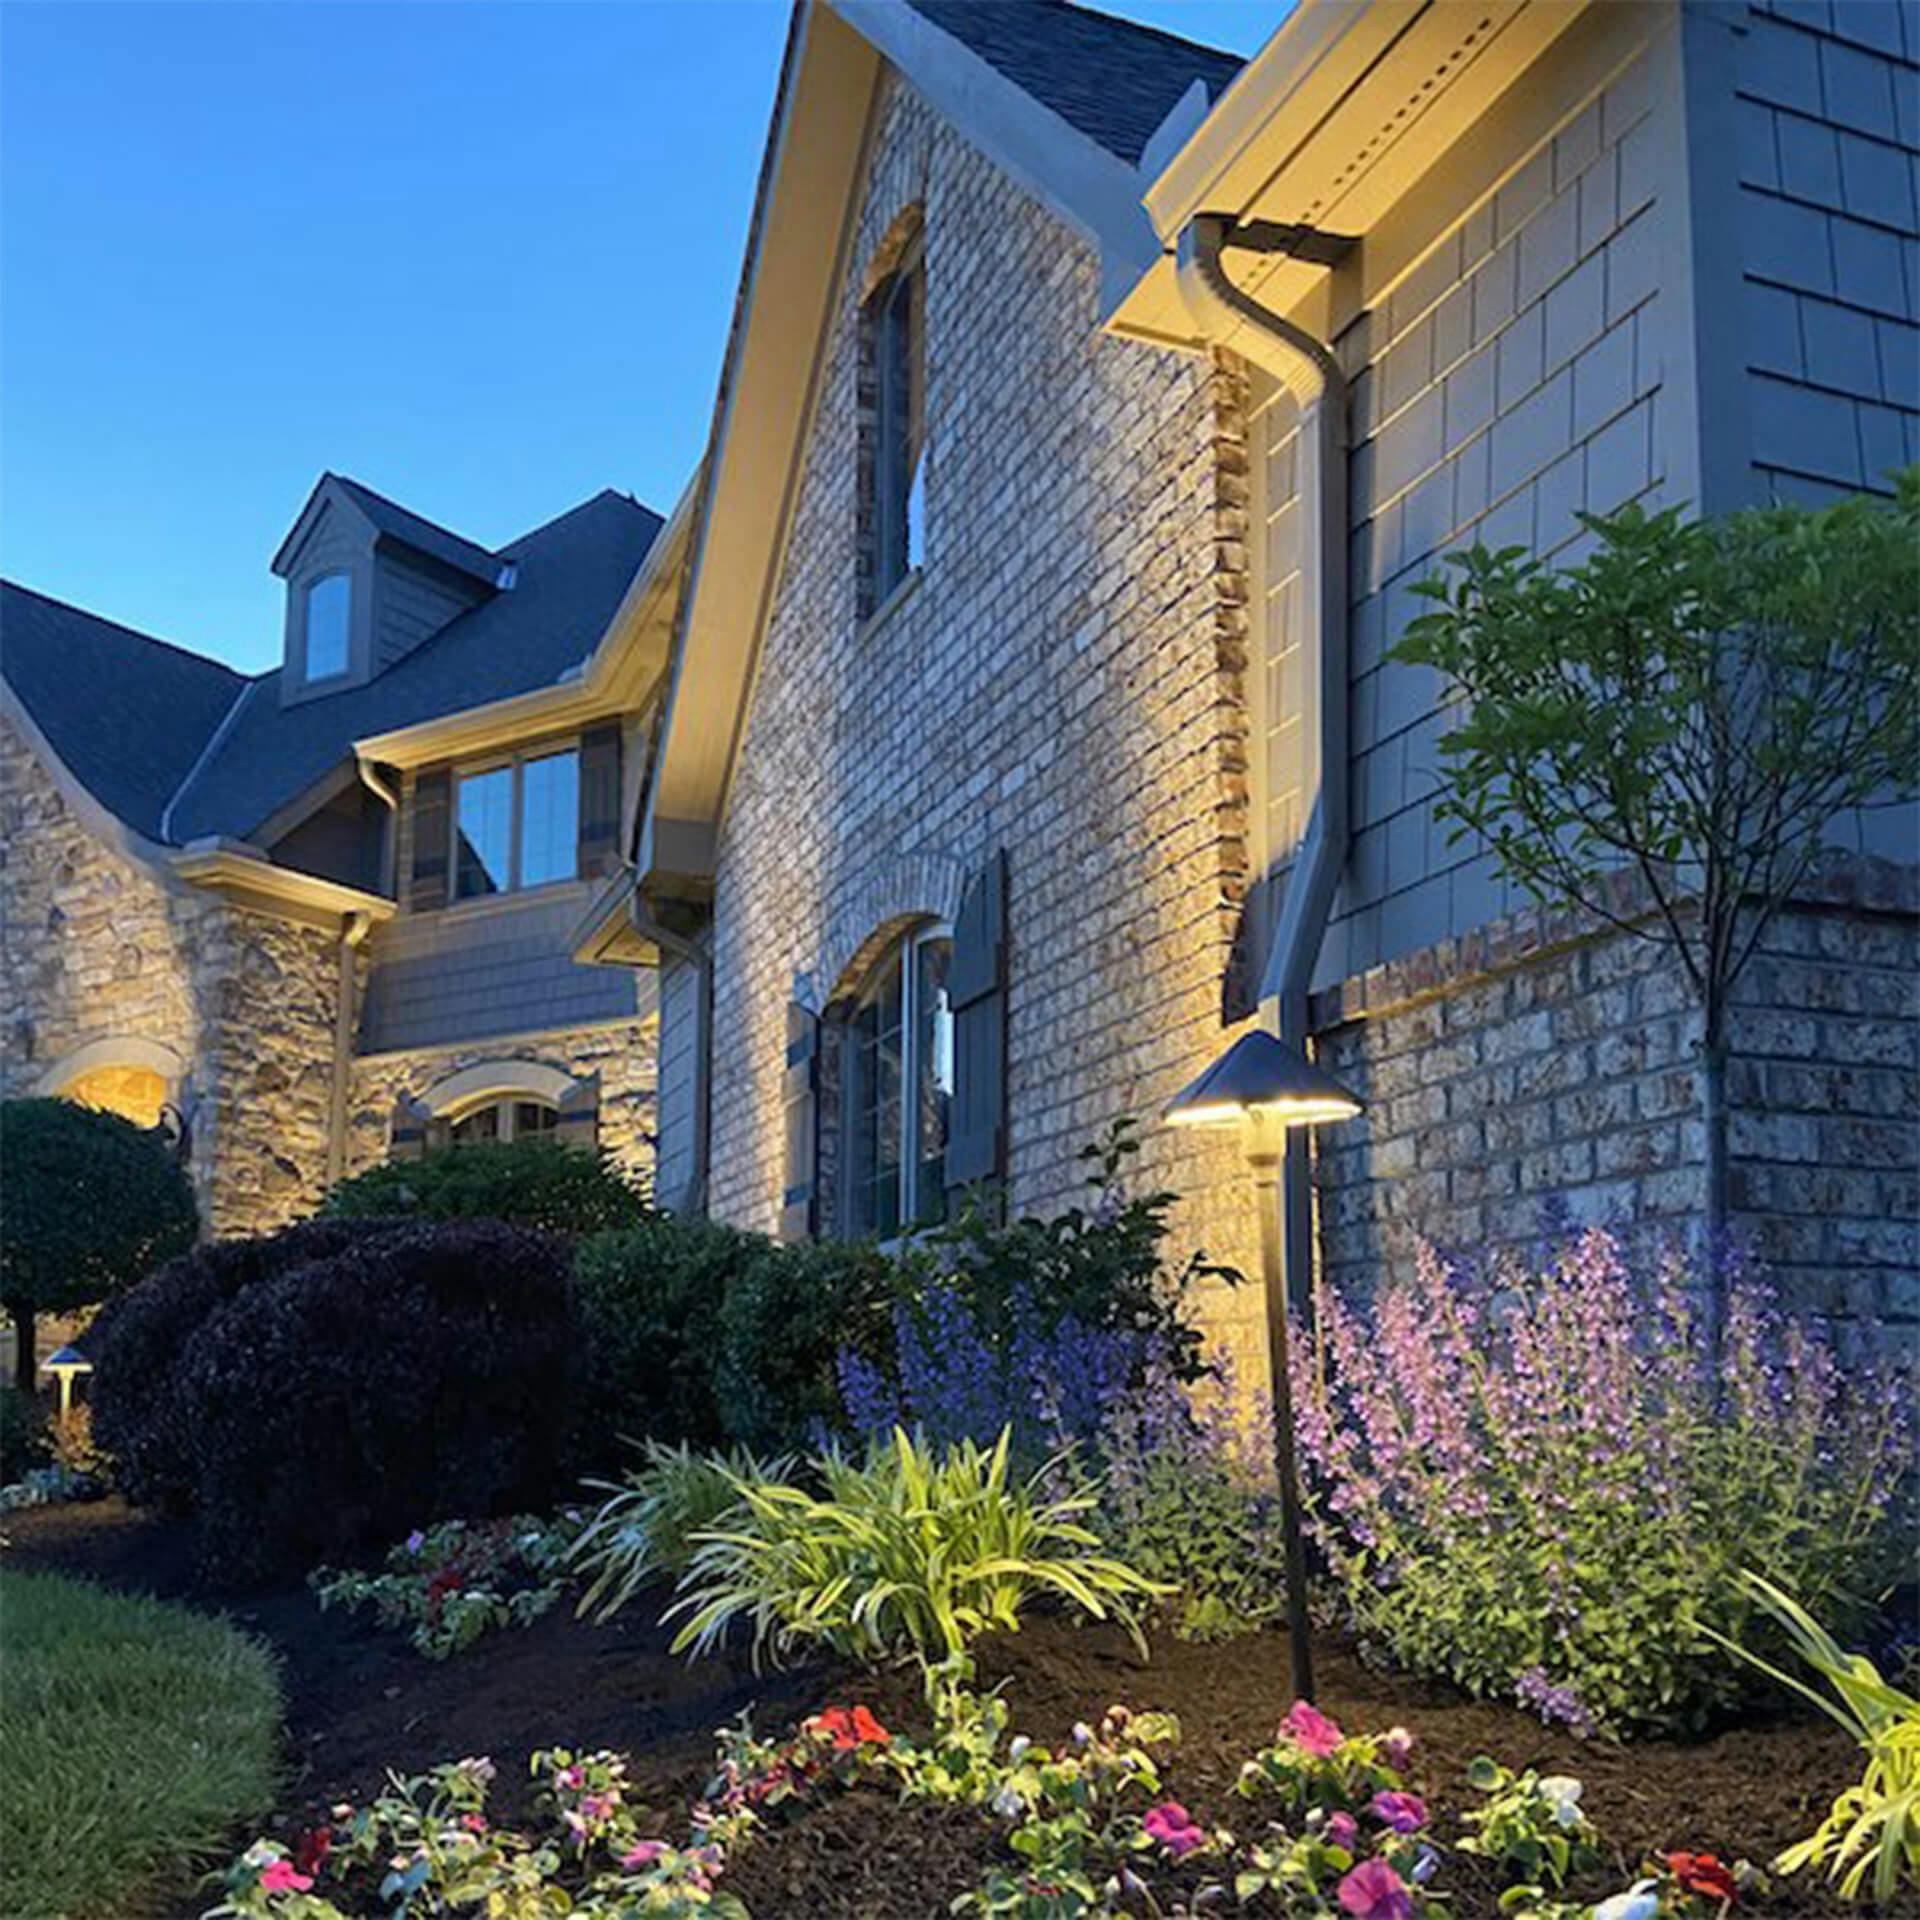 View of exterior of home at dusk, path lighting and exterior lighting is on.